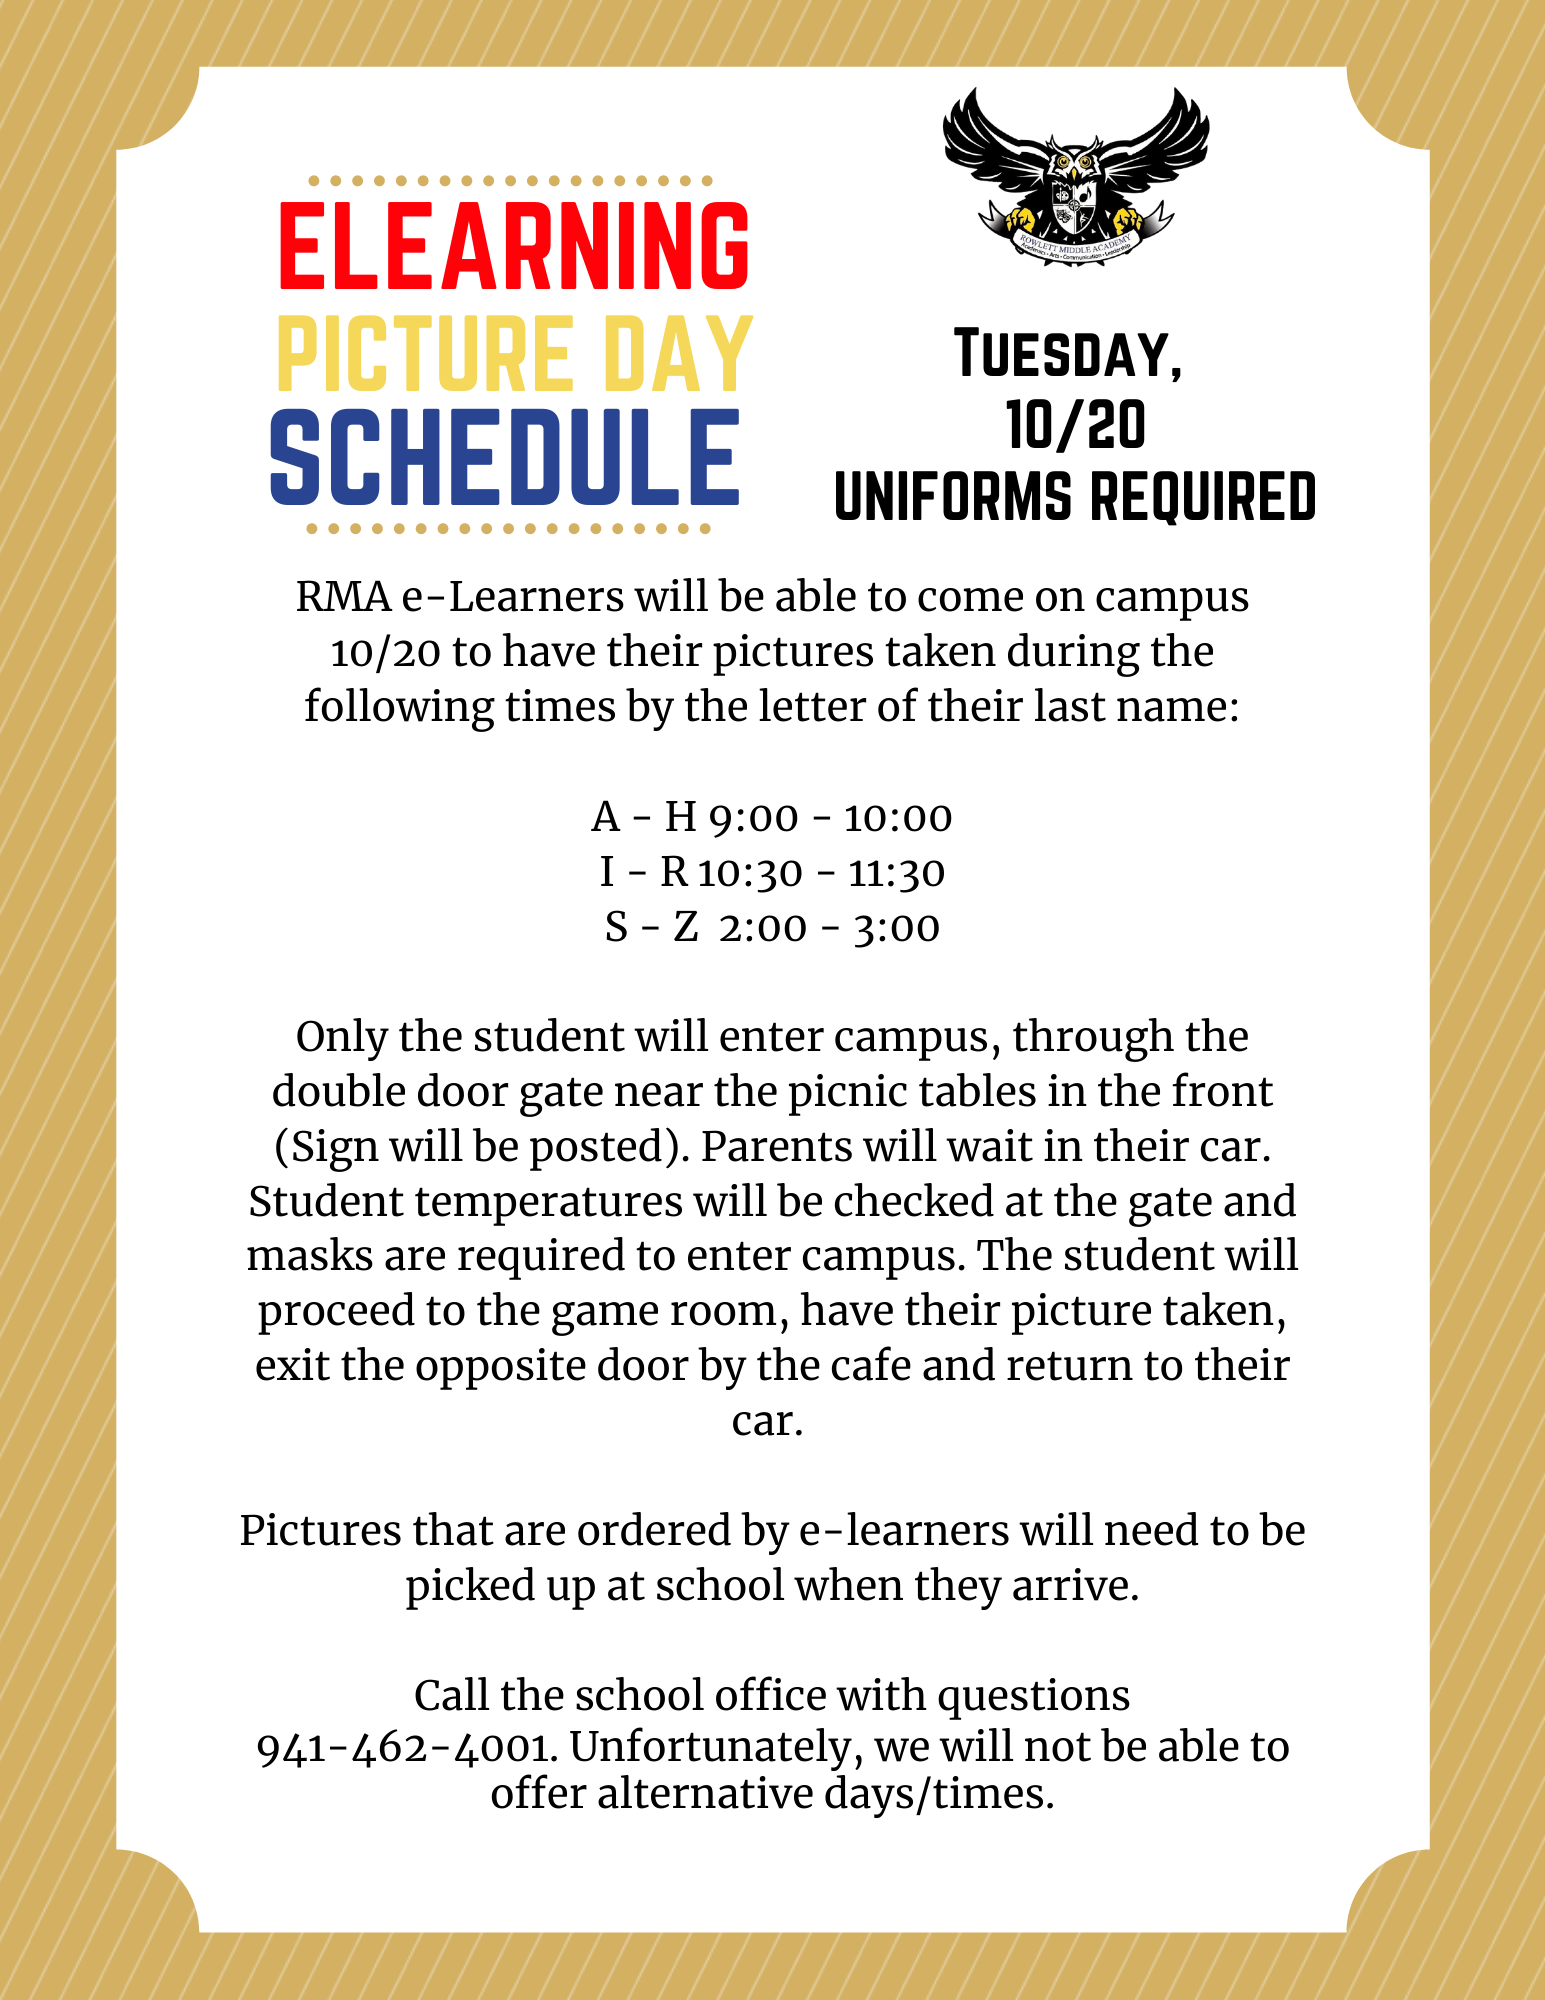 eLearning pic schedule